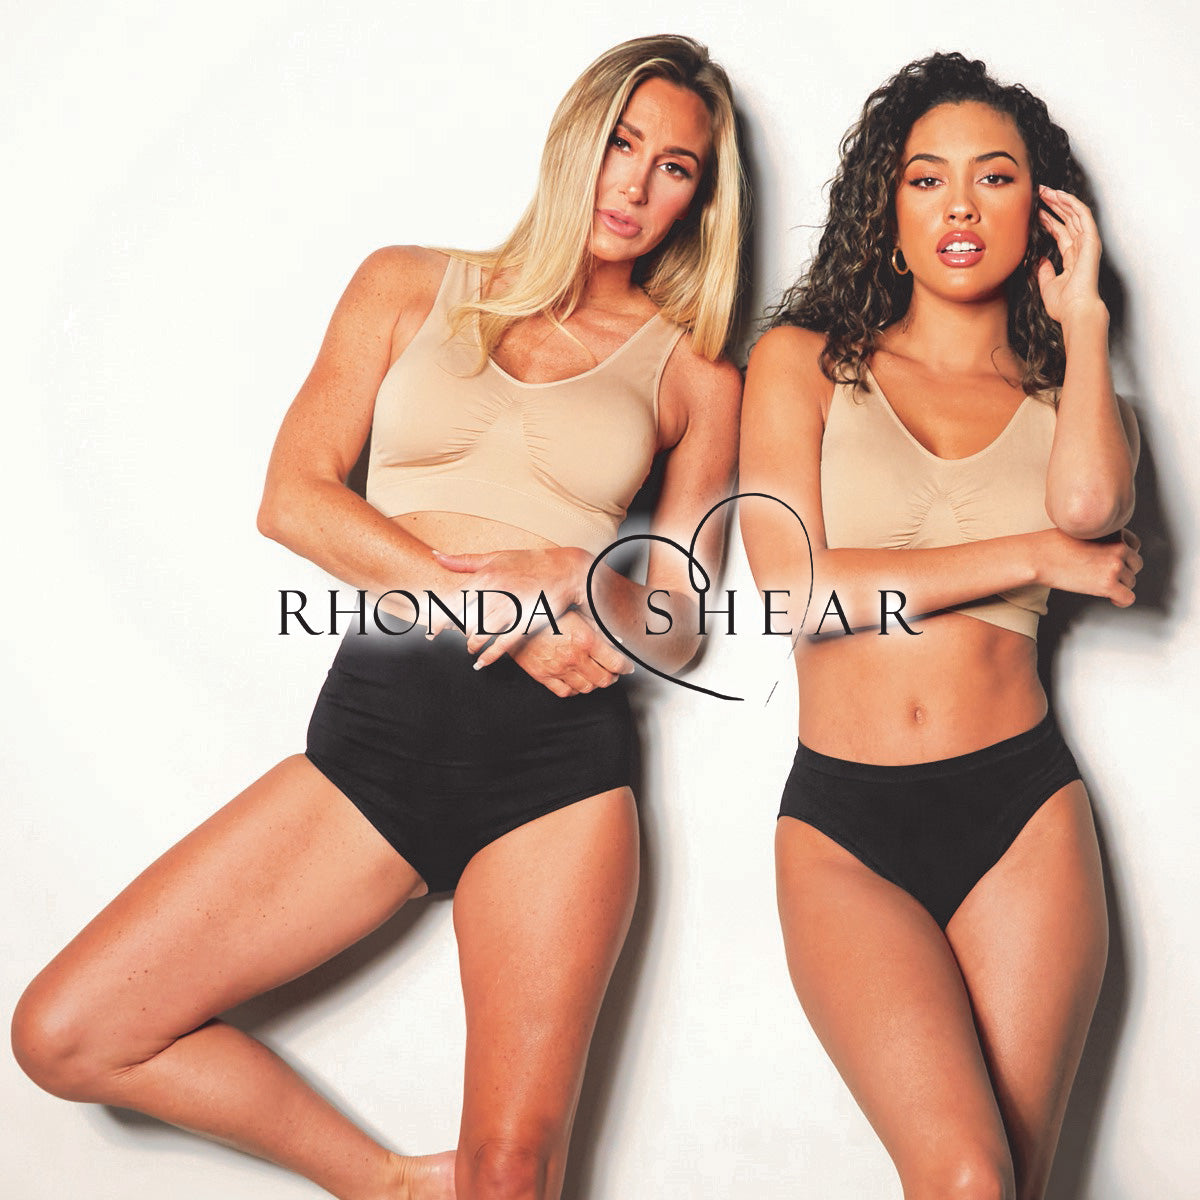 Rhonda Shear: Elevate your style, comfort, and confidence today!